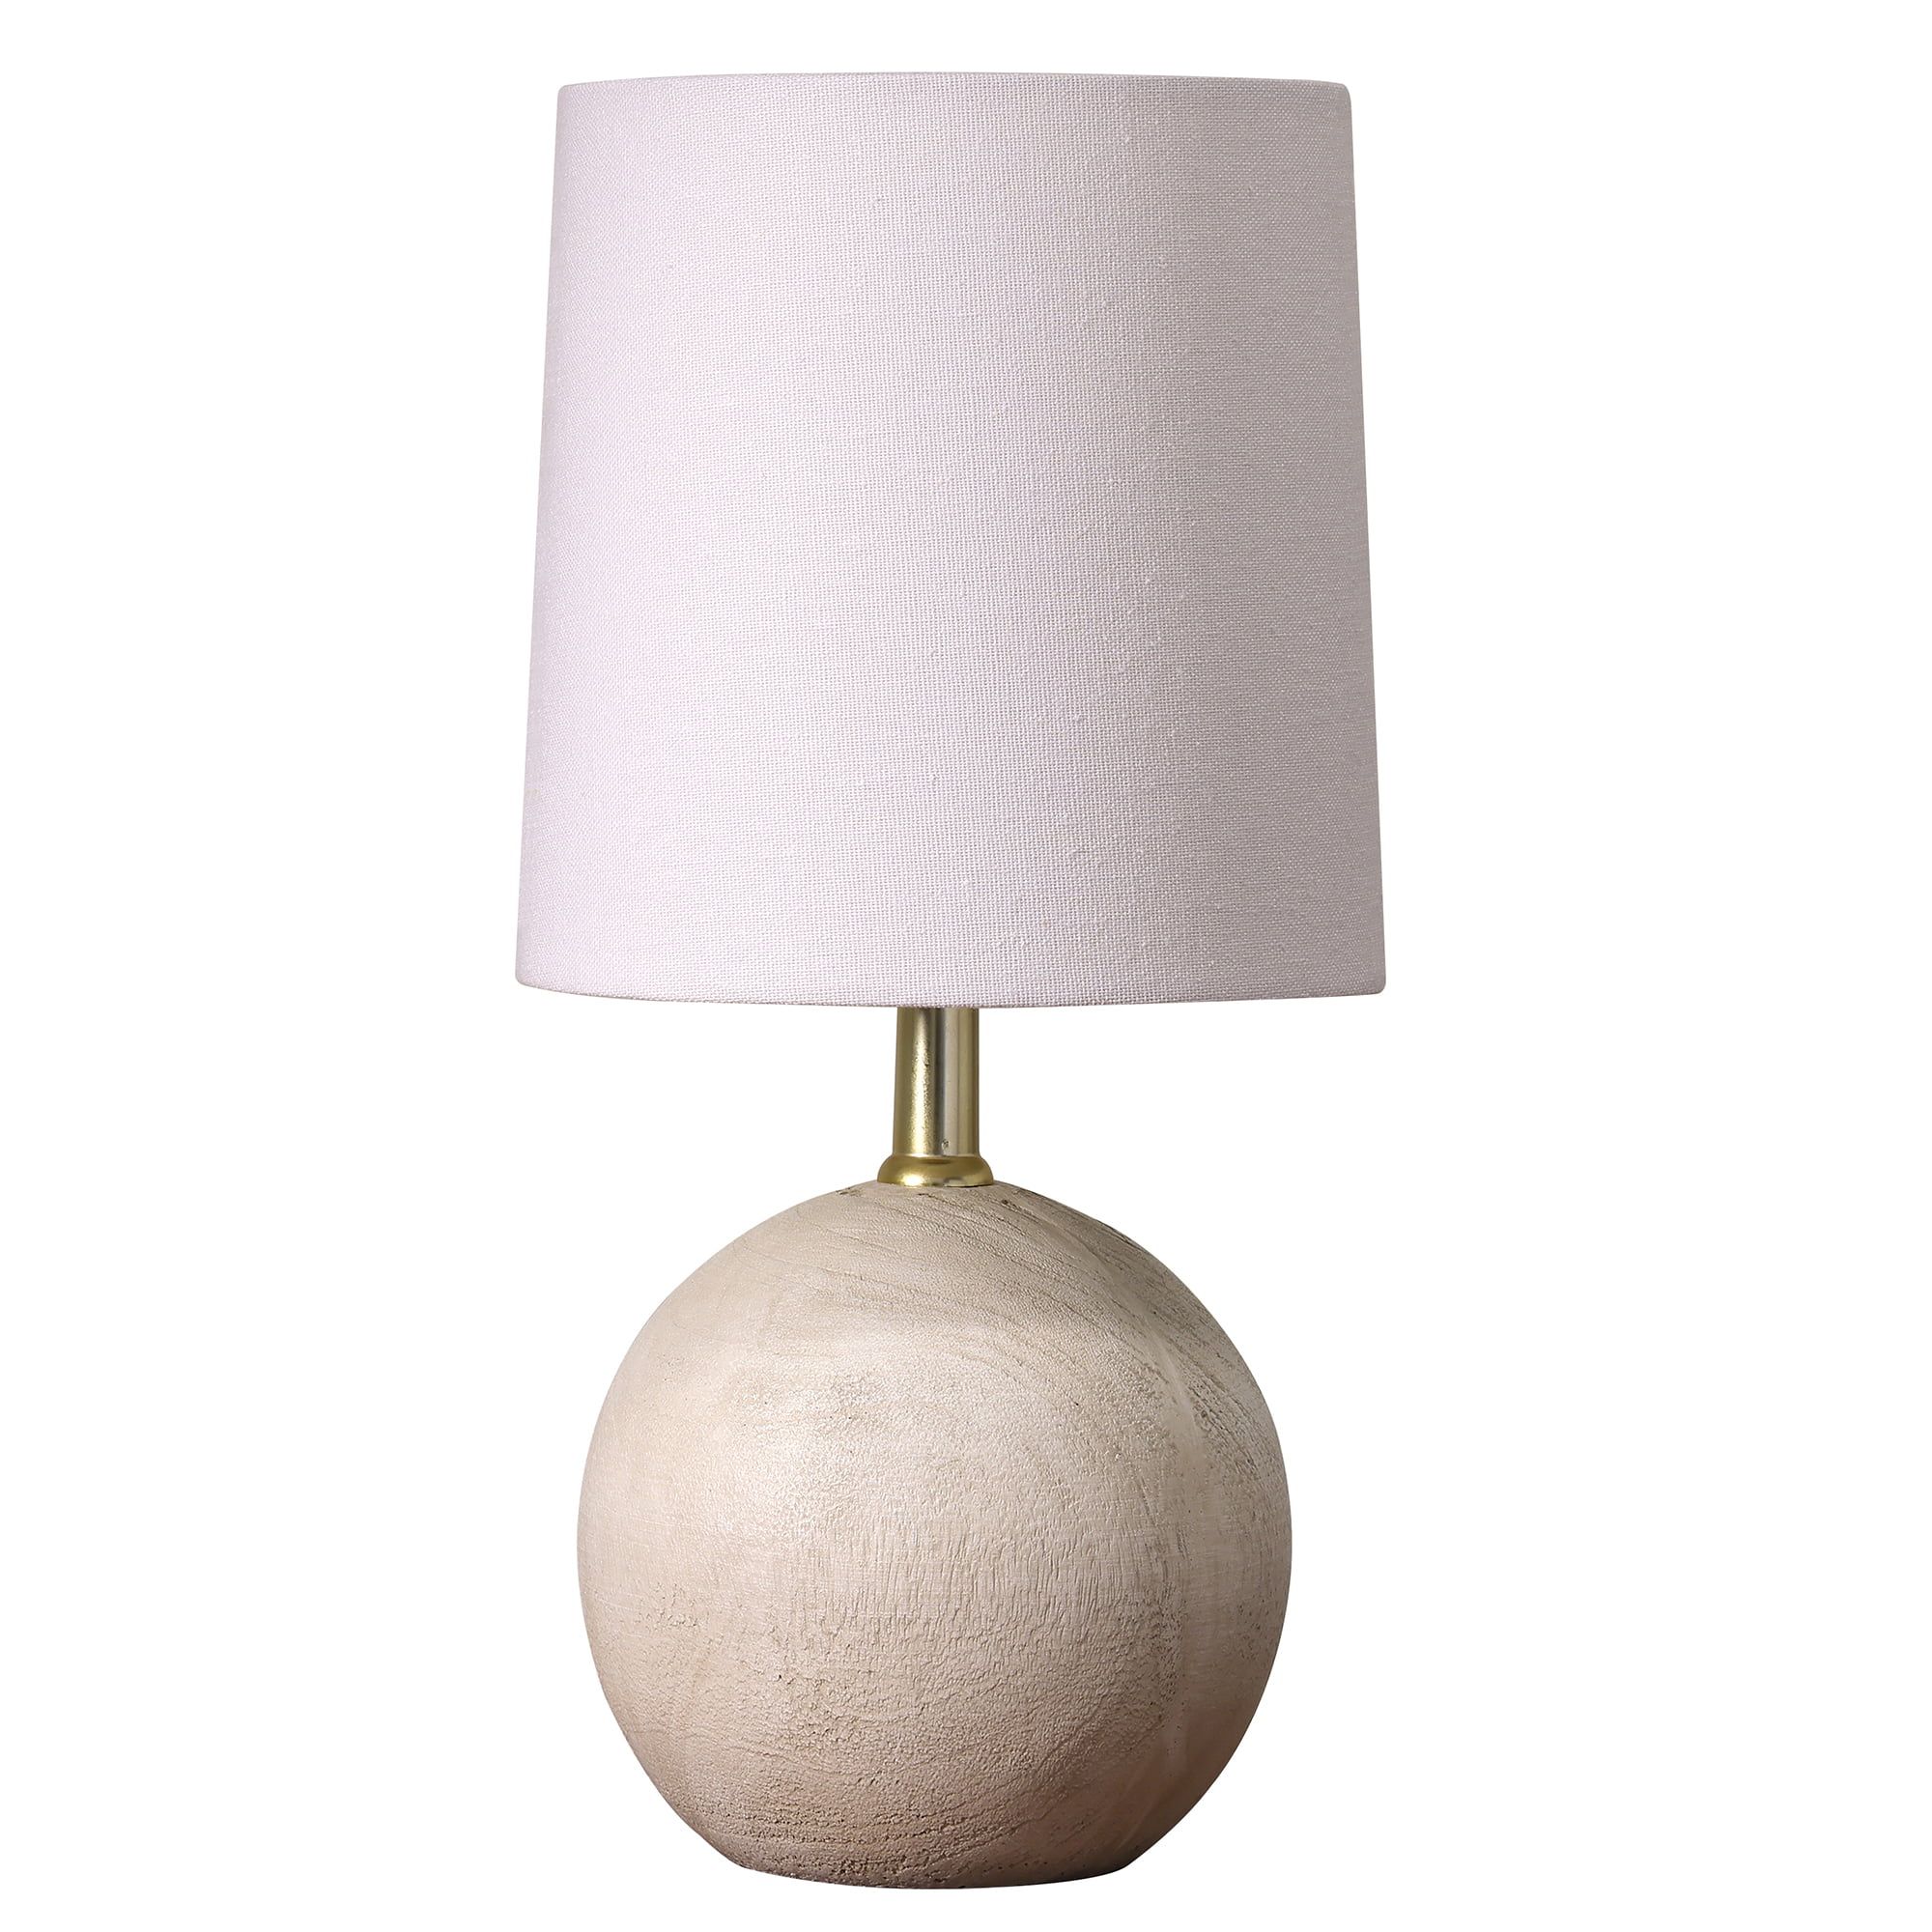 Xtreme Mini Ball Natural Grey Resin Lamp with White Fabric Shade, LED Light Bulb Not Included | Walmart (US)